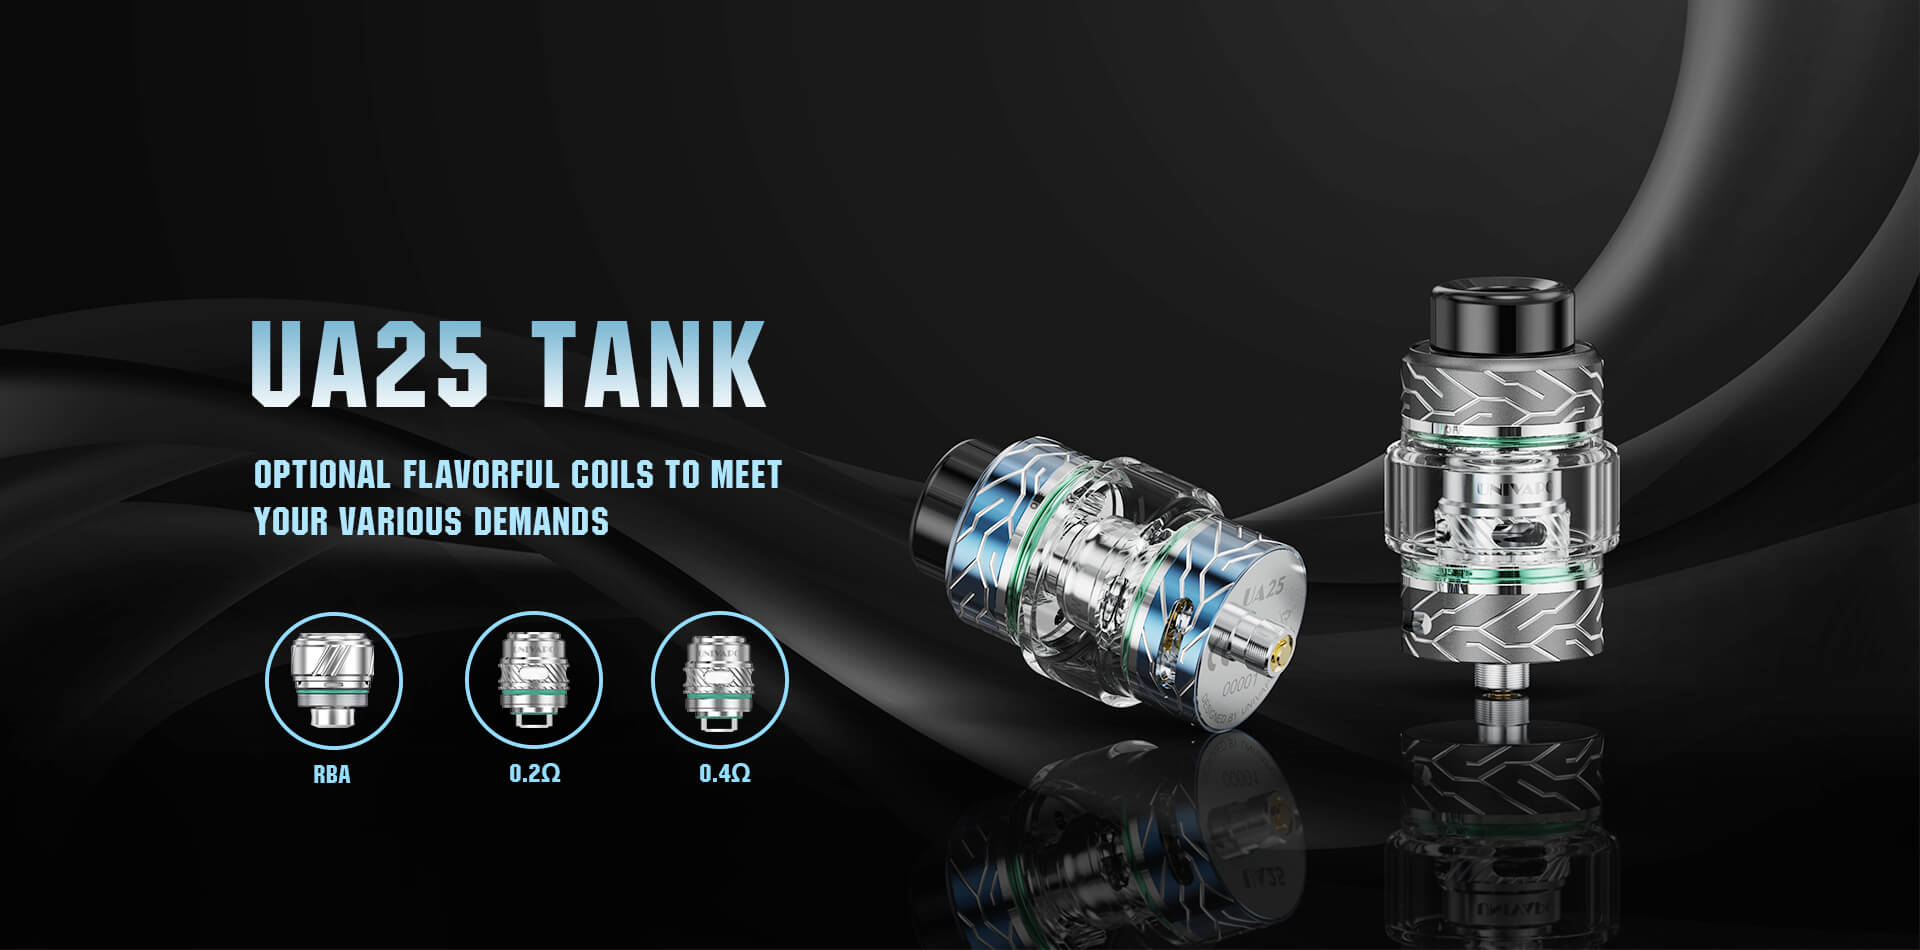 Ua25-tank  -  abundant flavor marvelous vapor - univapo's new sub-ohm tank,it comes out with its new mesh material and structure,which provides you abundant flavor and marvelous vapor.-8